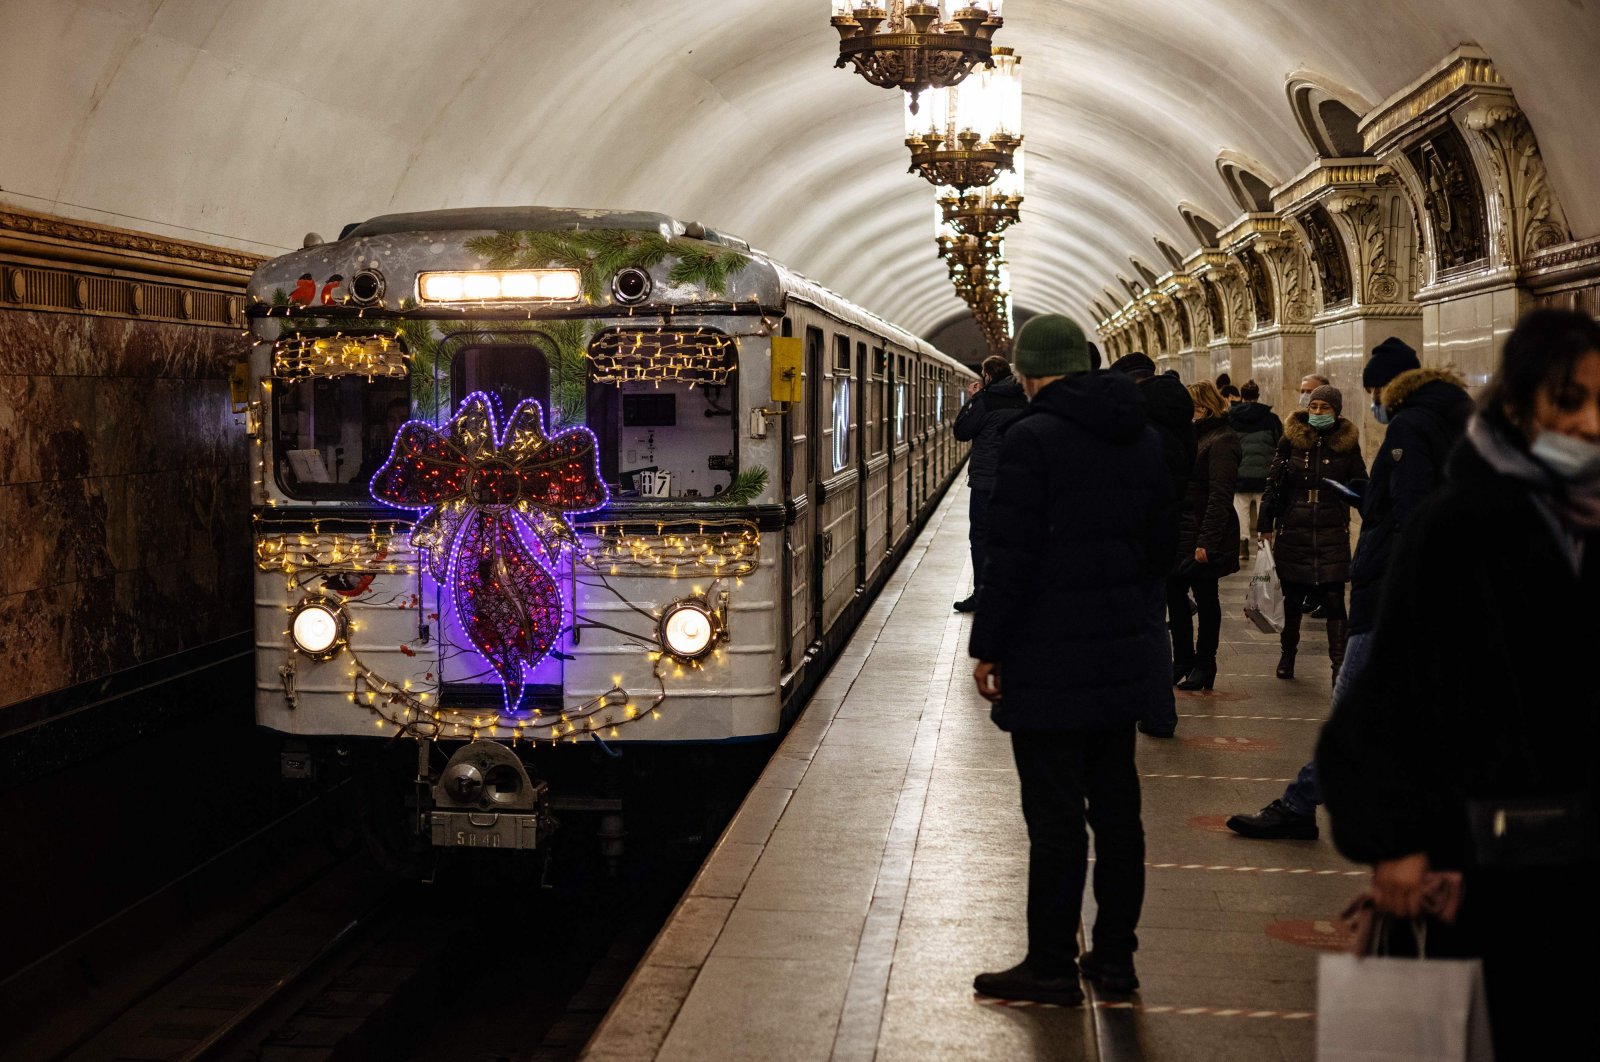 A metro train decorated with Christmas lights arrives at Belorusskaya metro station in Moscow on Dec. 25, 2020. (AFP Photo)